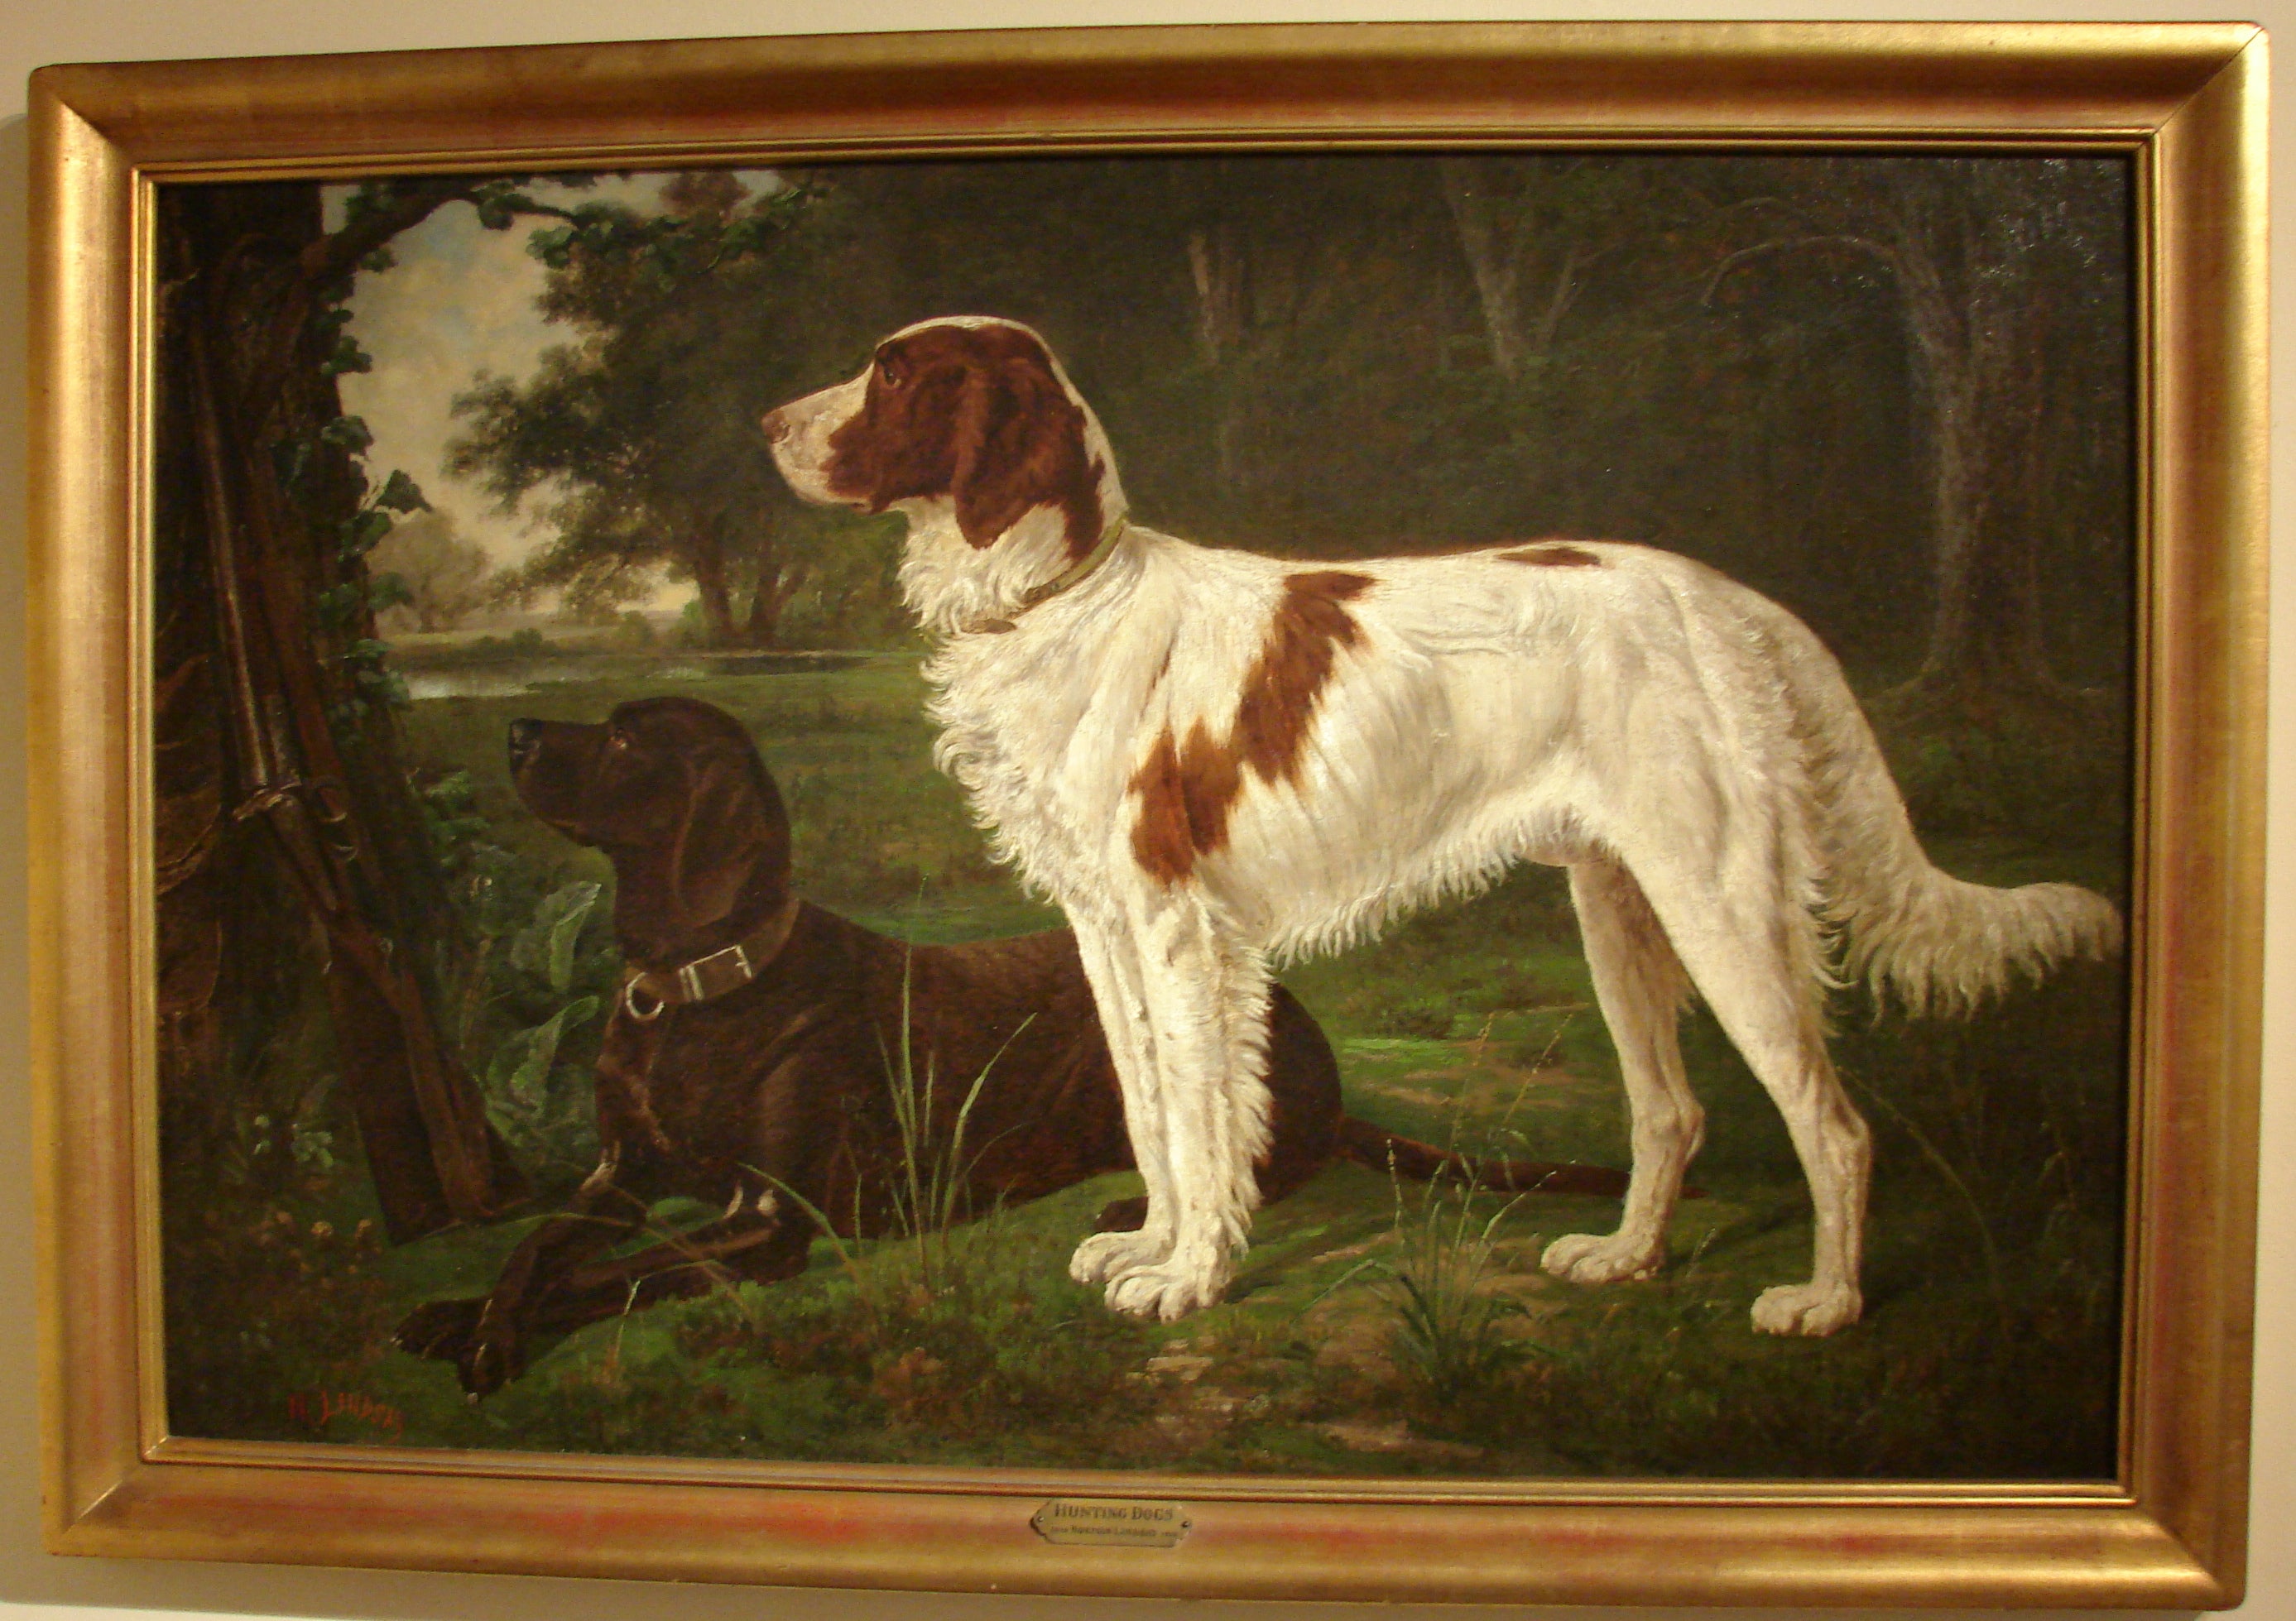 Large Oil on Canvas of Hunting Dogs